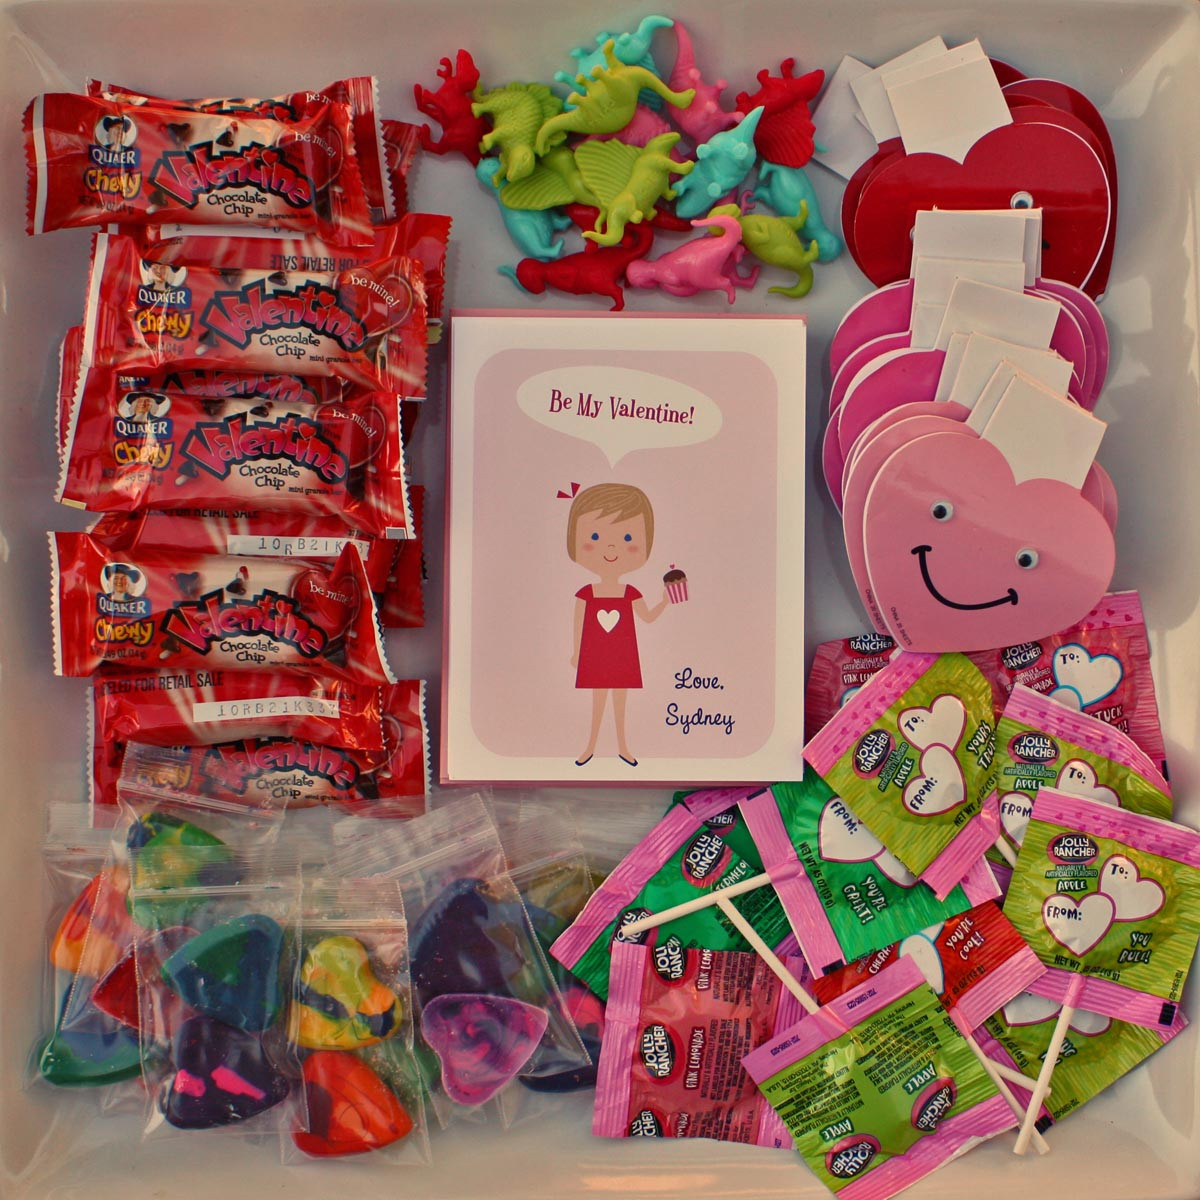 Valentines Day Goodie Bag Ideas
 All In e Days Time Valentine s Day Goody Bags